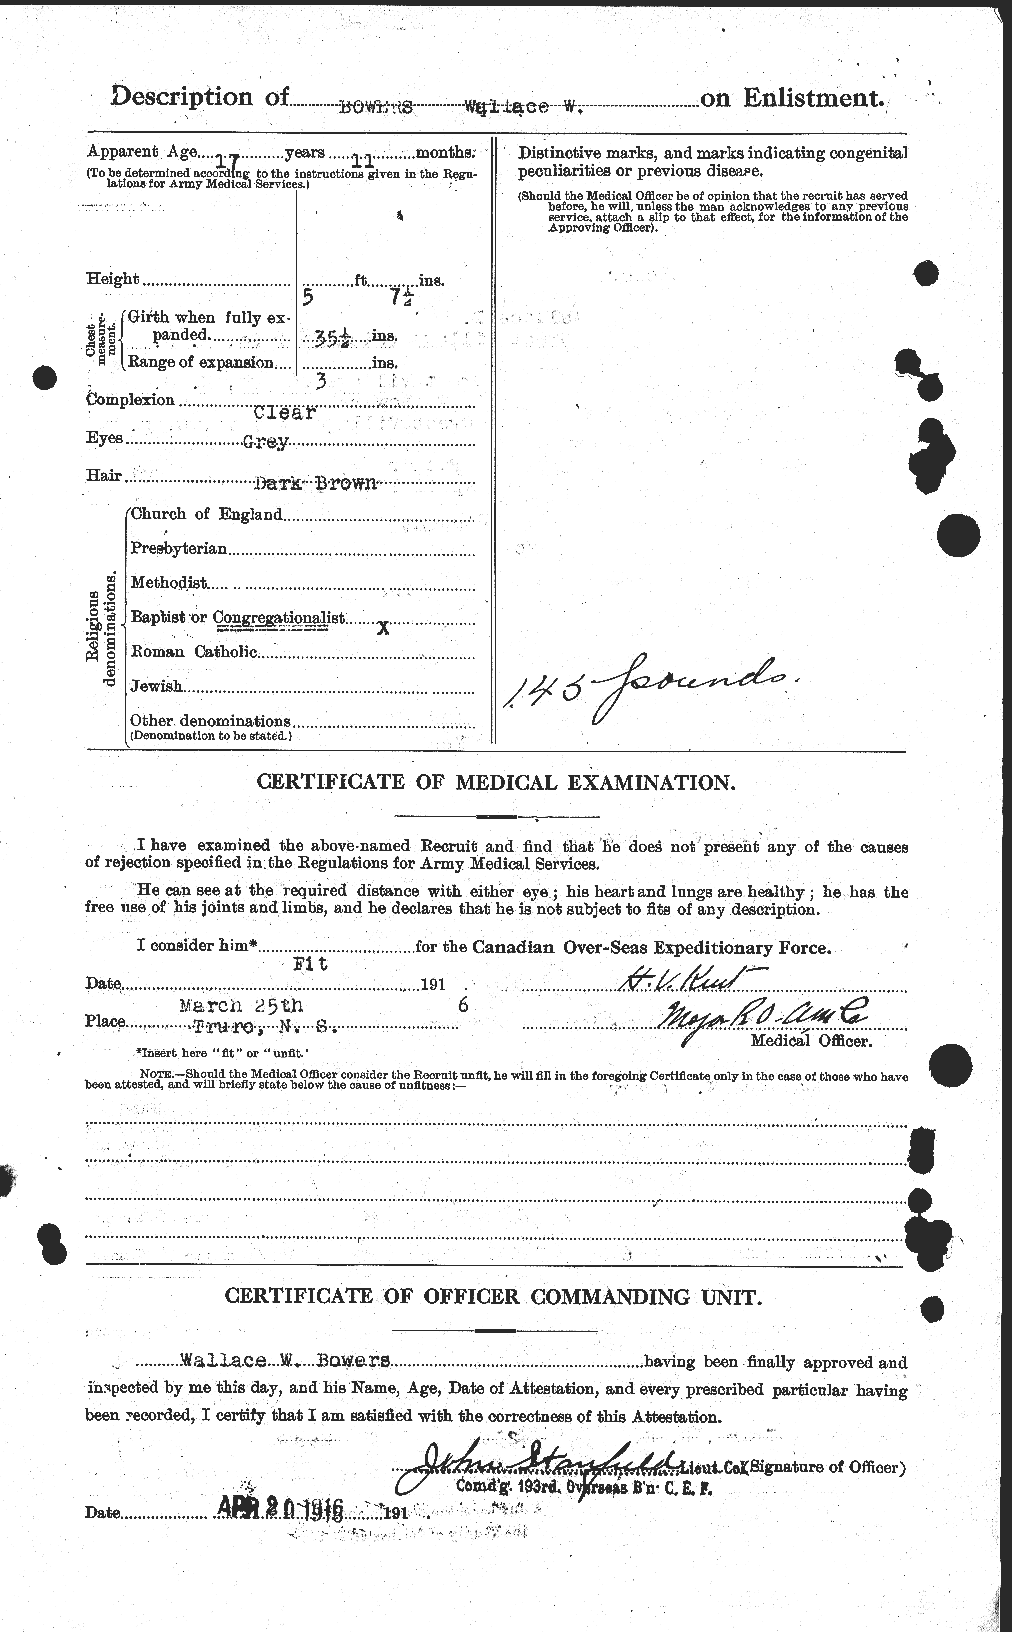 Personnel Records of the First World War - CEF 253582b